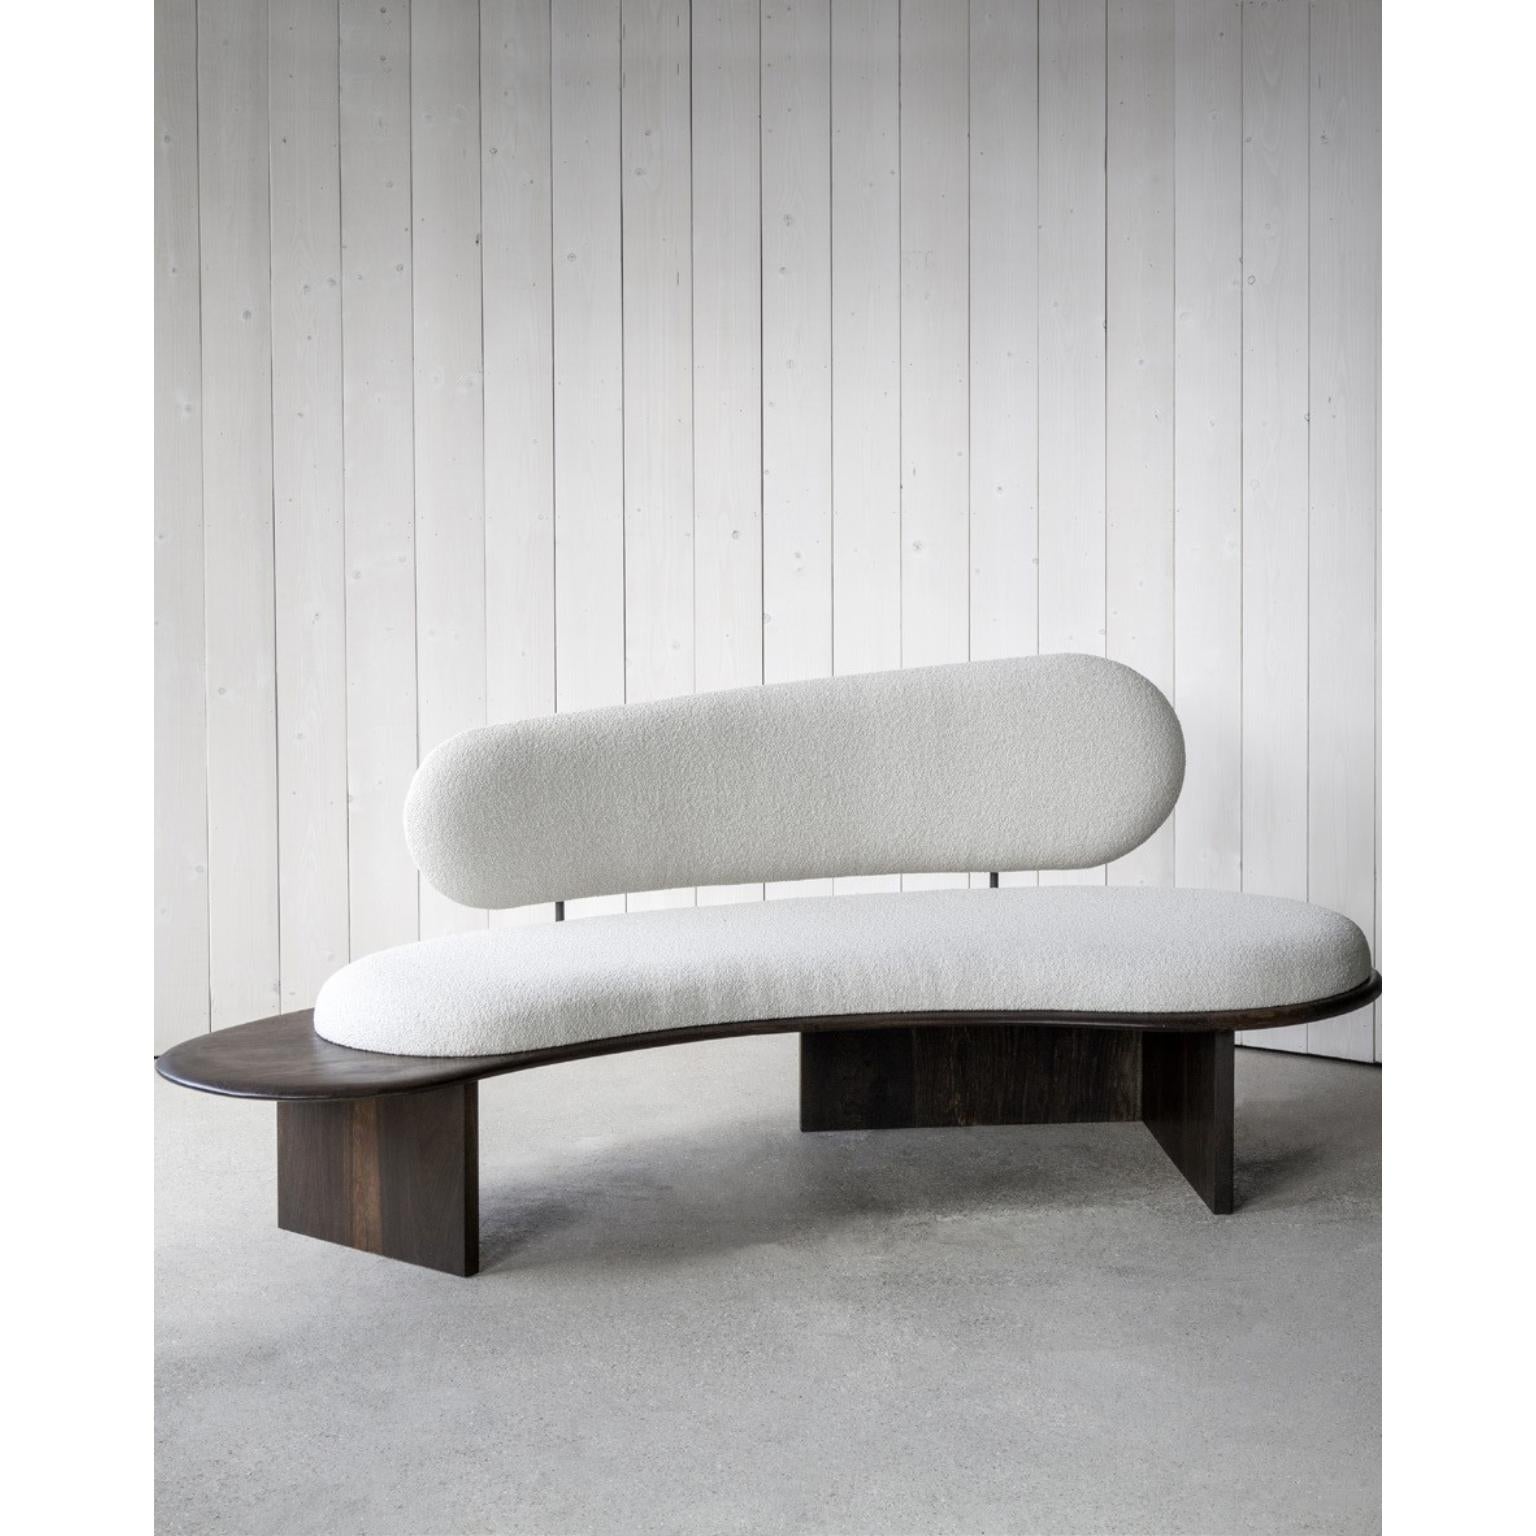 Pebble sofa by Fred Rigby Studio
Dimensions: L 200 x W 90 x H 80 cm
Materials: solid oak, dedar boucle weave wool, natural ebonised and oil

Fred Rigby Studio is a London-based furniture and interior design practice founded by Fred Rigby in